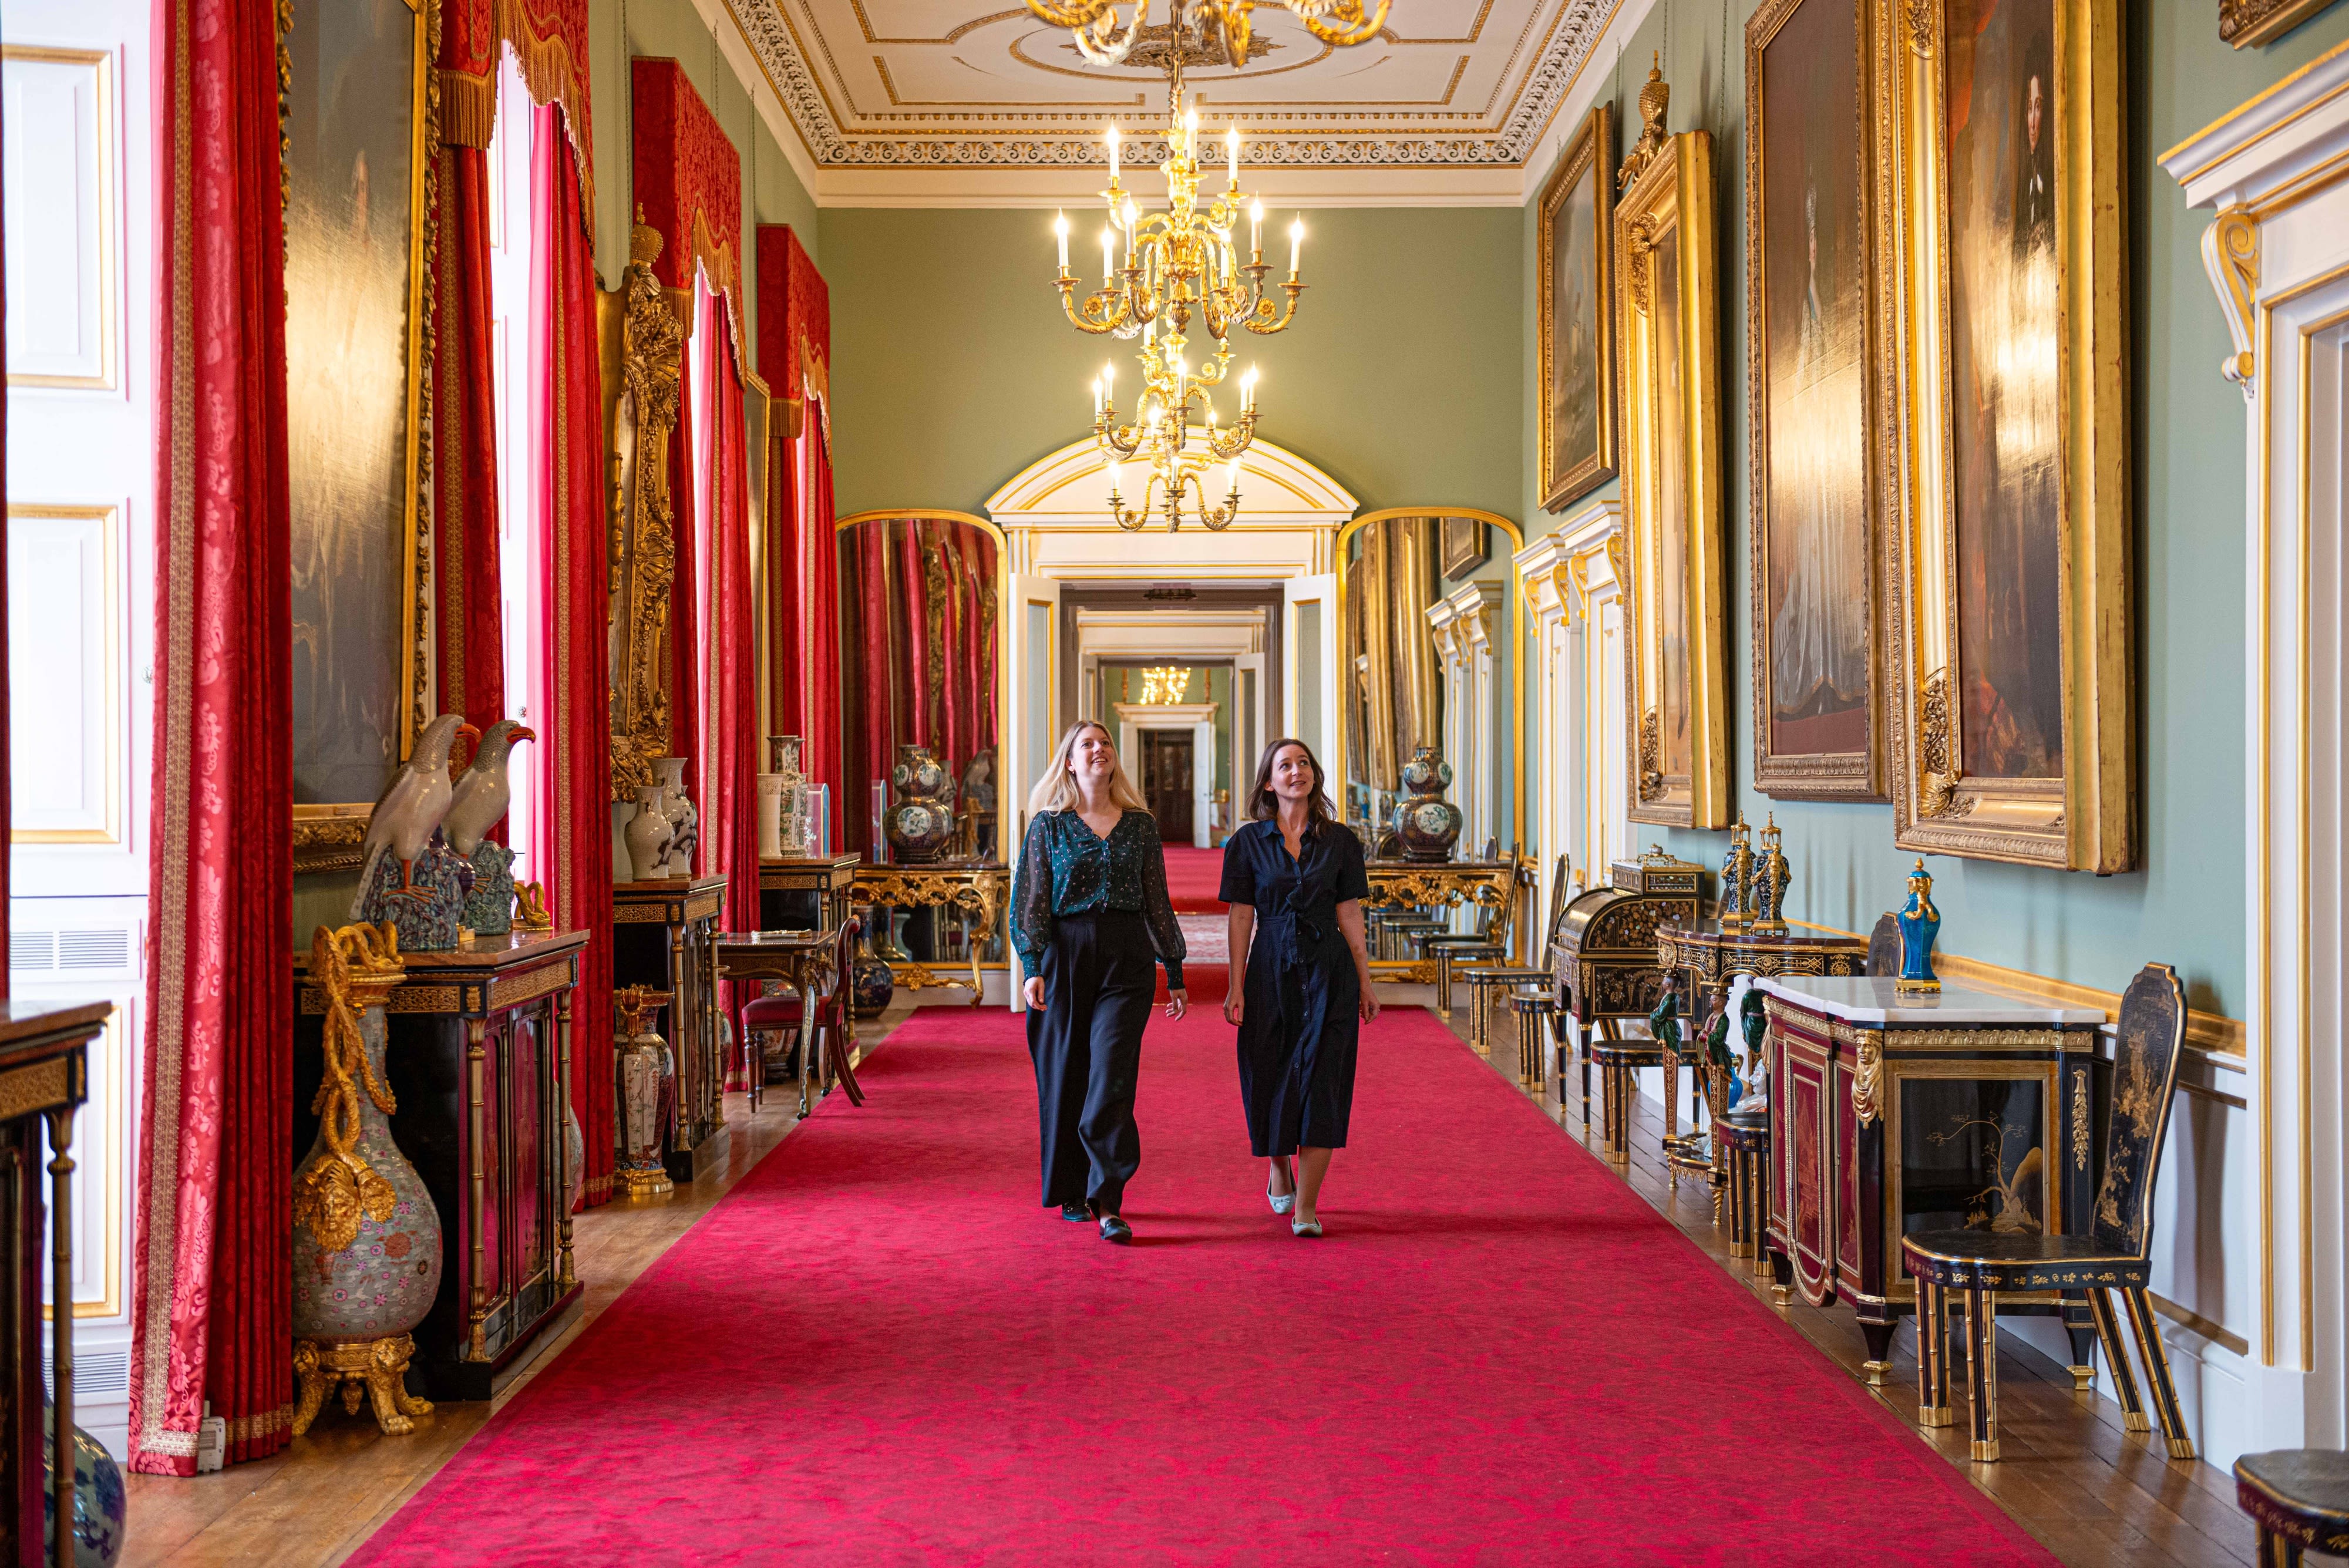 Buckingham Palace’s East Wing (the one with the balcony) opens to the public